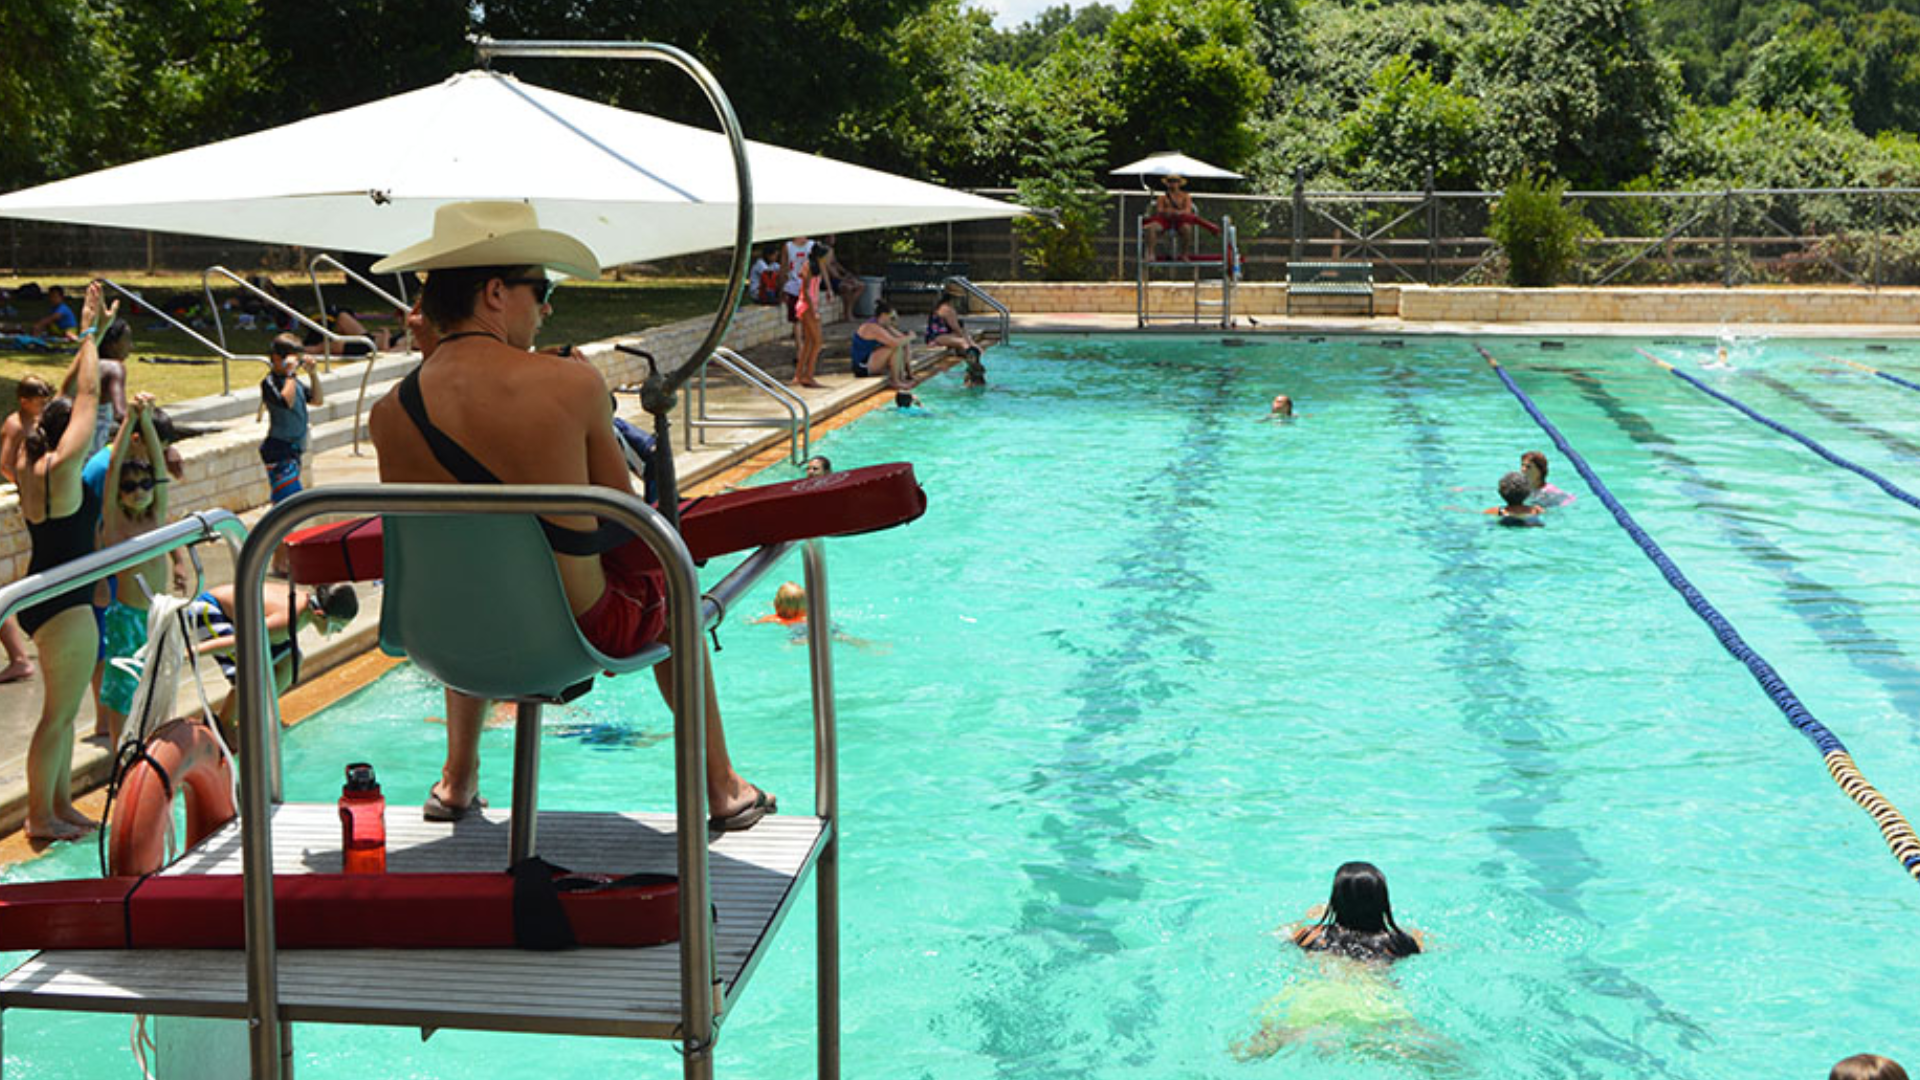 Looking for a part-time position this summer in Austin? Lifeguarding roles start at $20 an hour. Those interested must be at least 15 years old to apply.